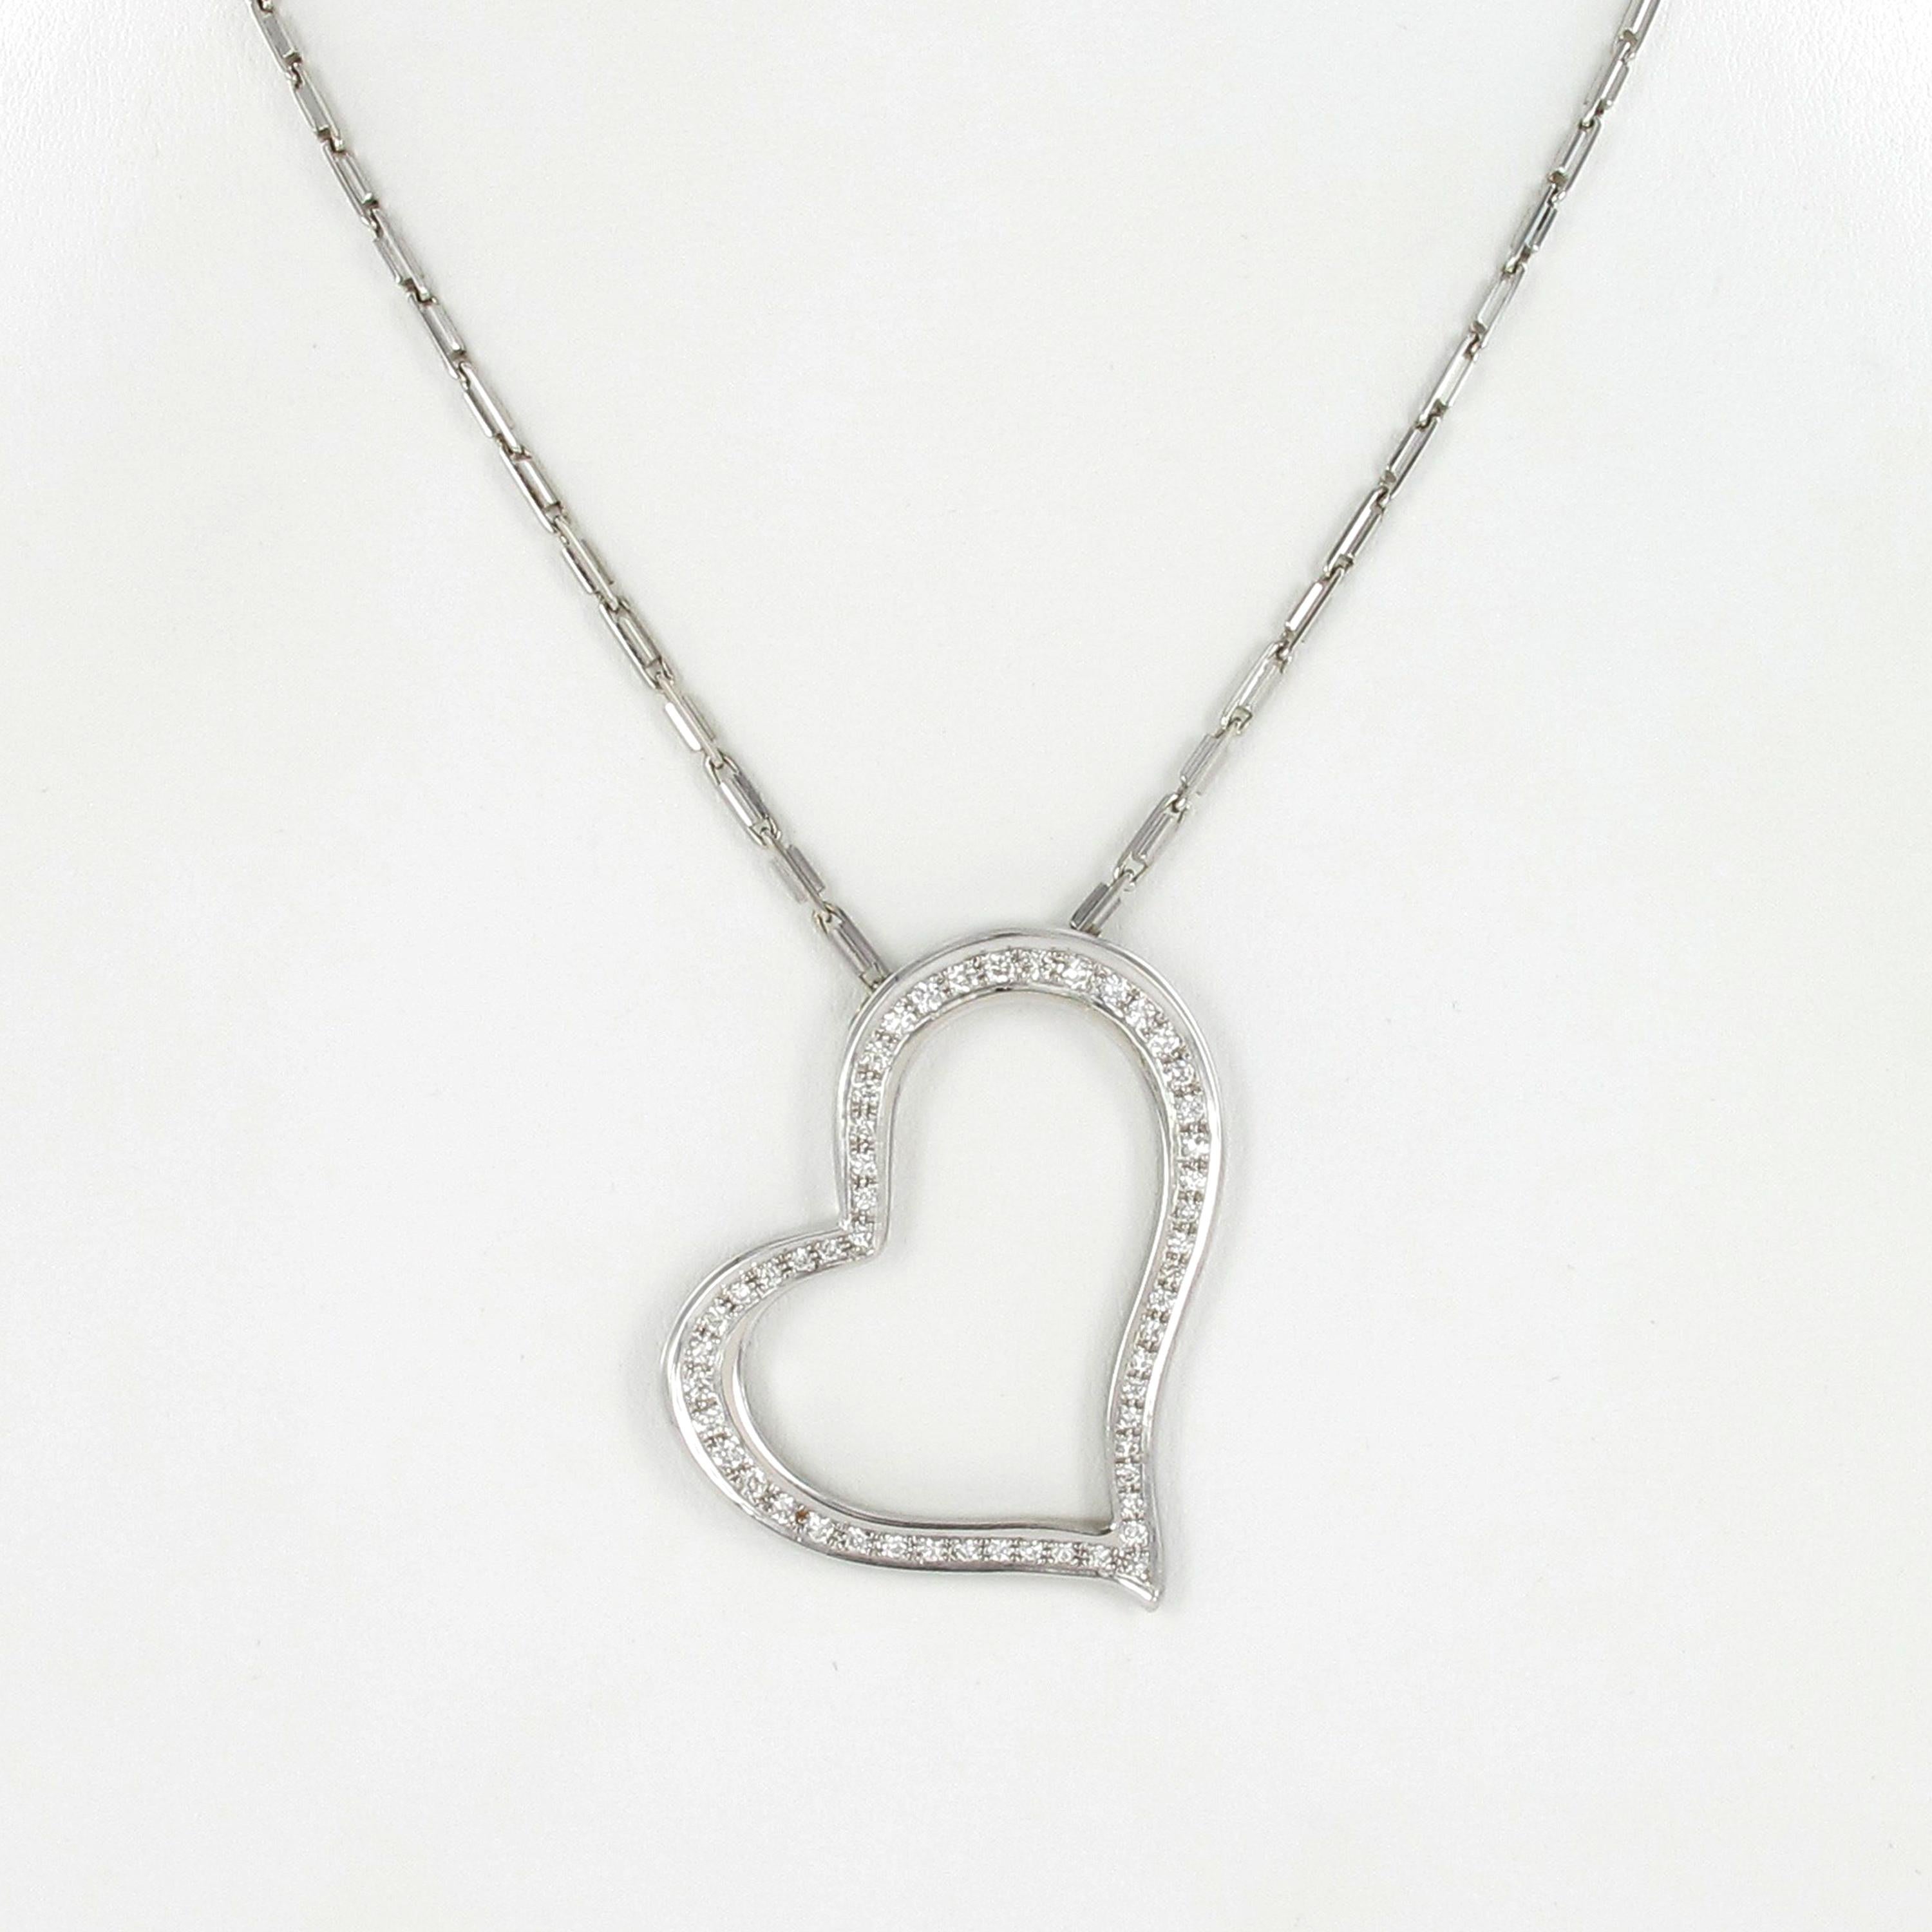 Modern heart shaped pendant in white gold 750, set with 52 brilliant cut diamonds totaling approx. 1 ct of G/H-vs quality. A real sweetheart!

Please, ask for additional pictures if you are interested in this item.

Length of chain: 50.0 cm /  19.7